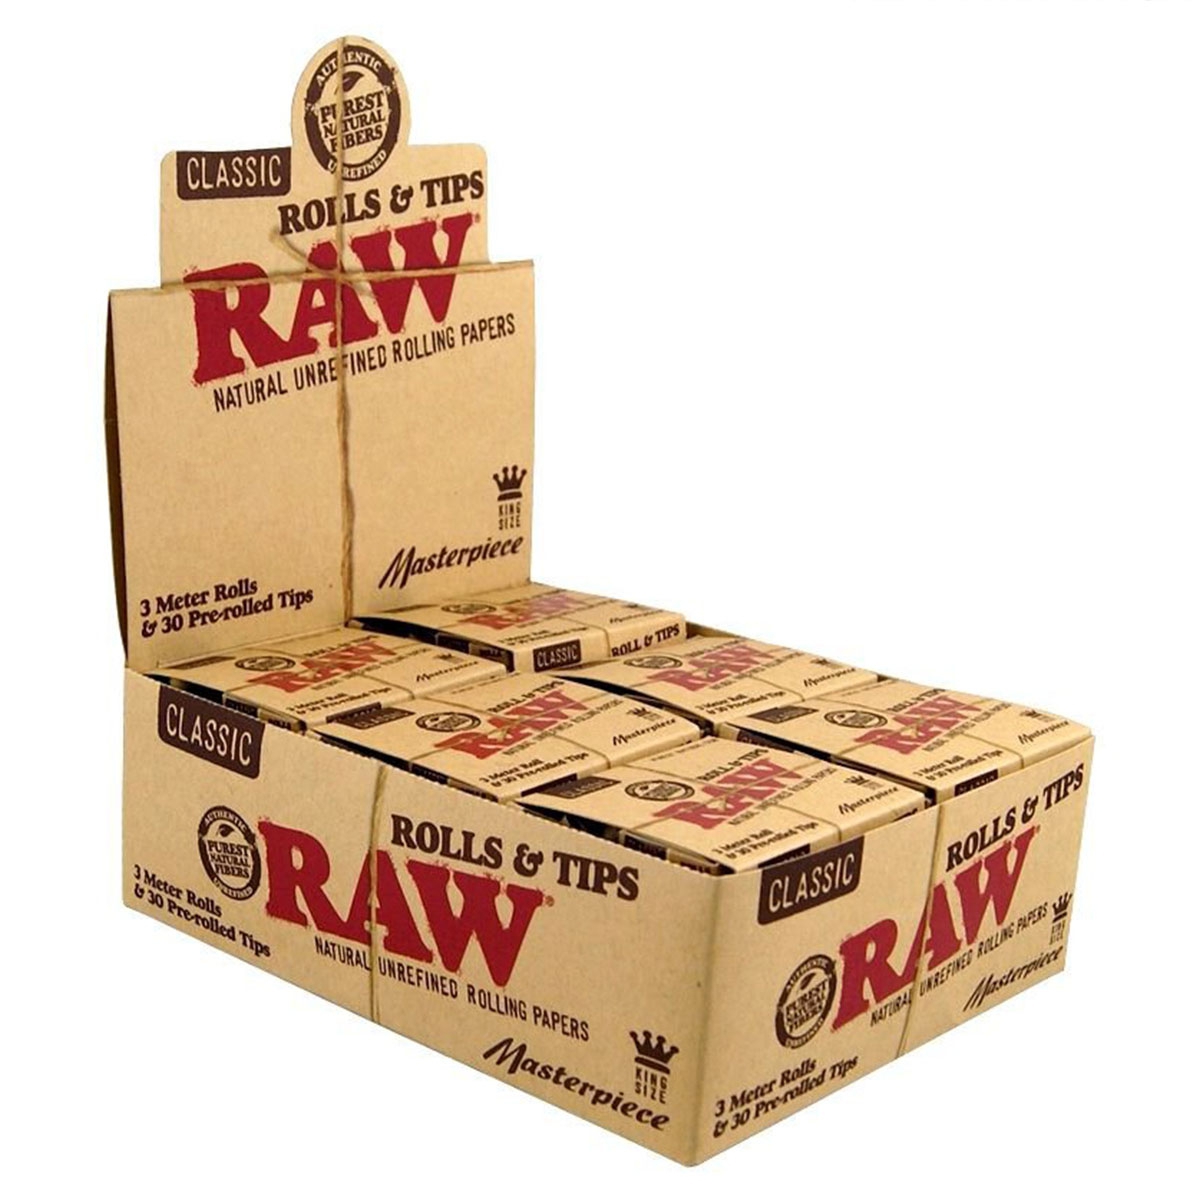 2 Boxes of Raw Classic King Size Natural Unrefined 3 Meter Rolls Rolling Papers 